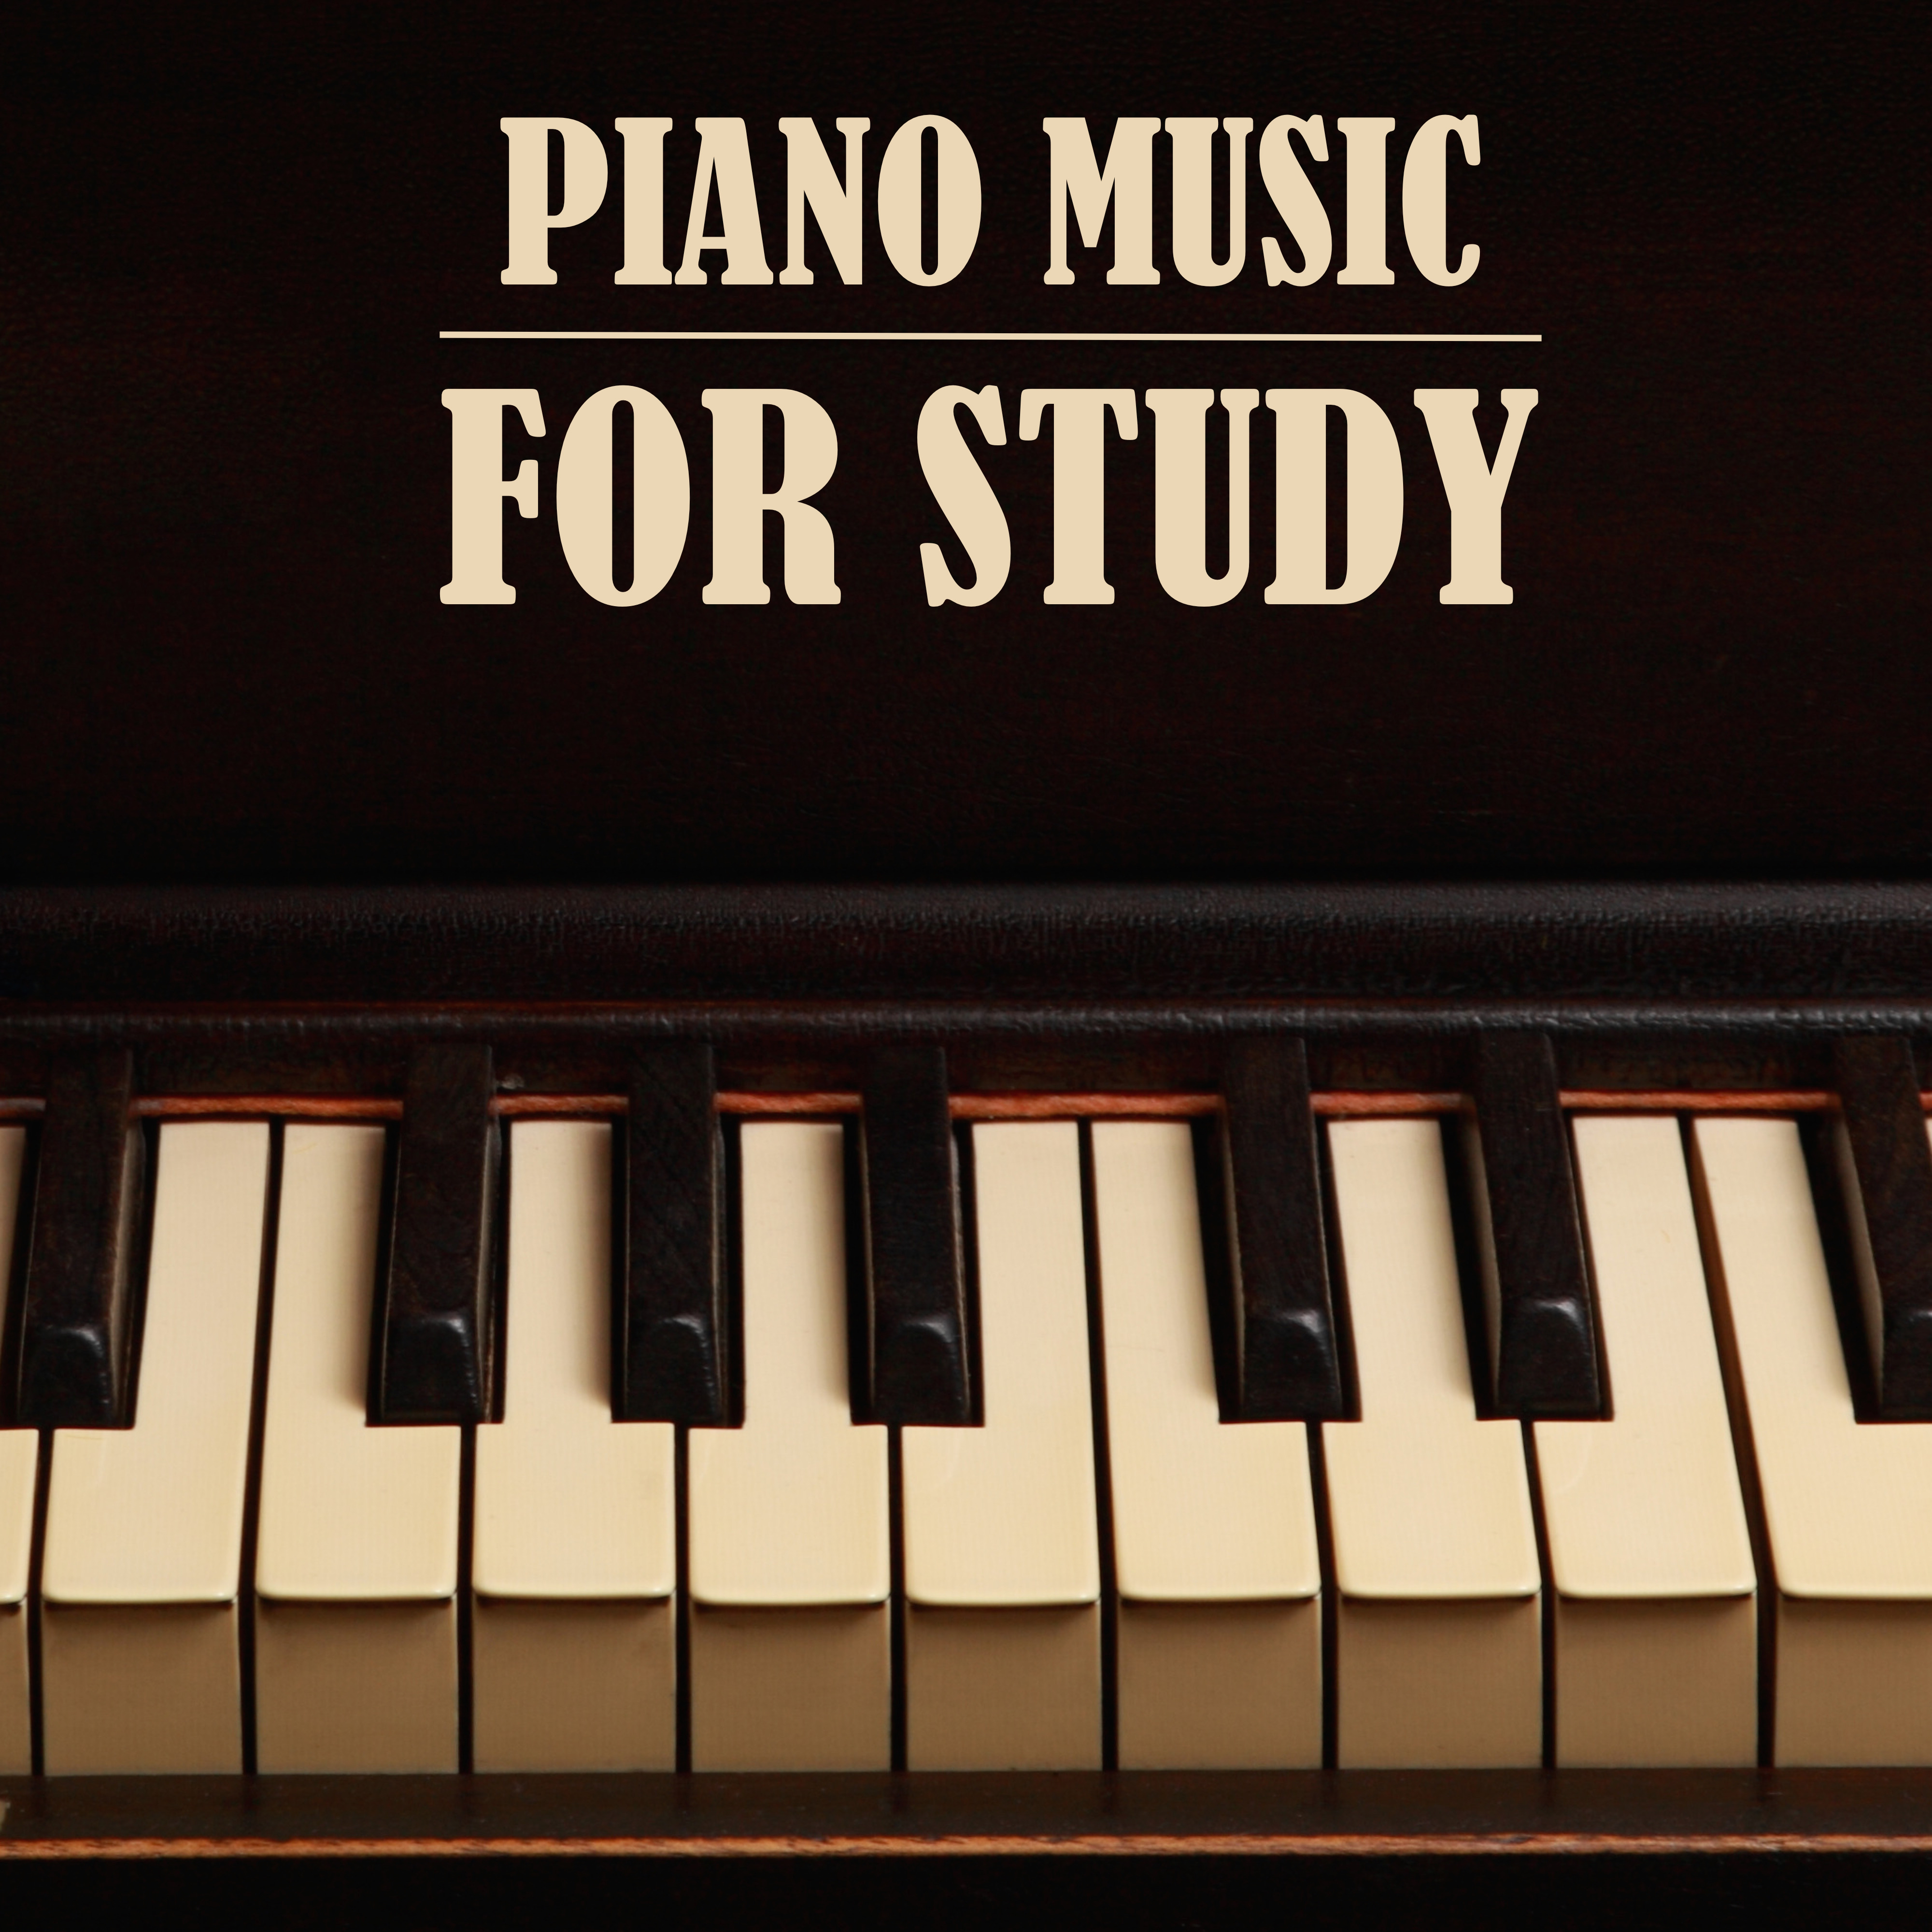 Piano Music for Study - Studying and Concentration Music (Solo Piano Collection)